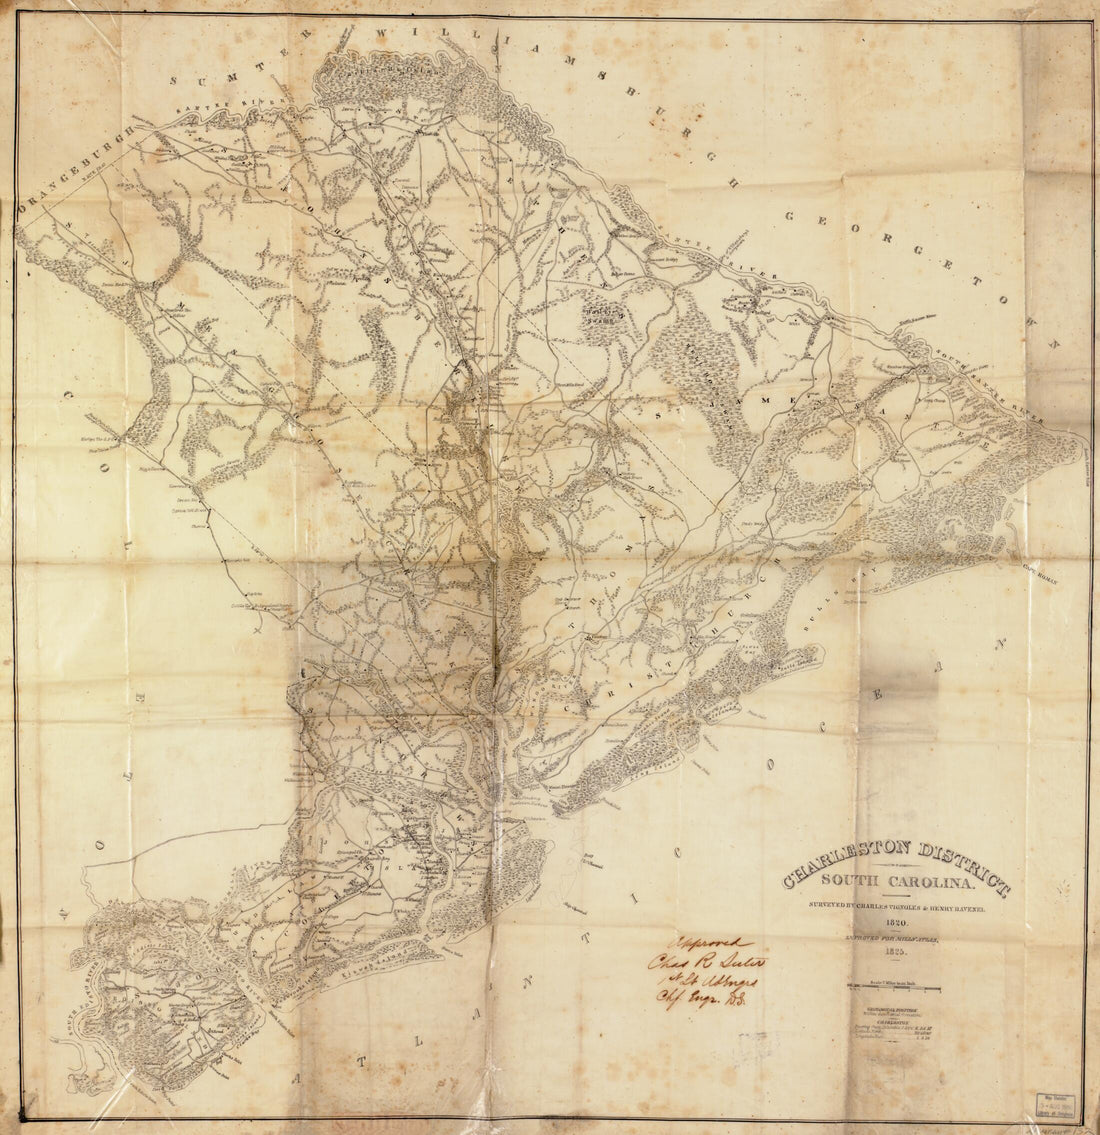 This old map of Charleston District, South Carolina from 1825 was created by Robert Mills, Henry Ravenel, Charles Blacker Vignoles in 1825